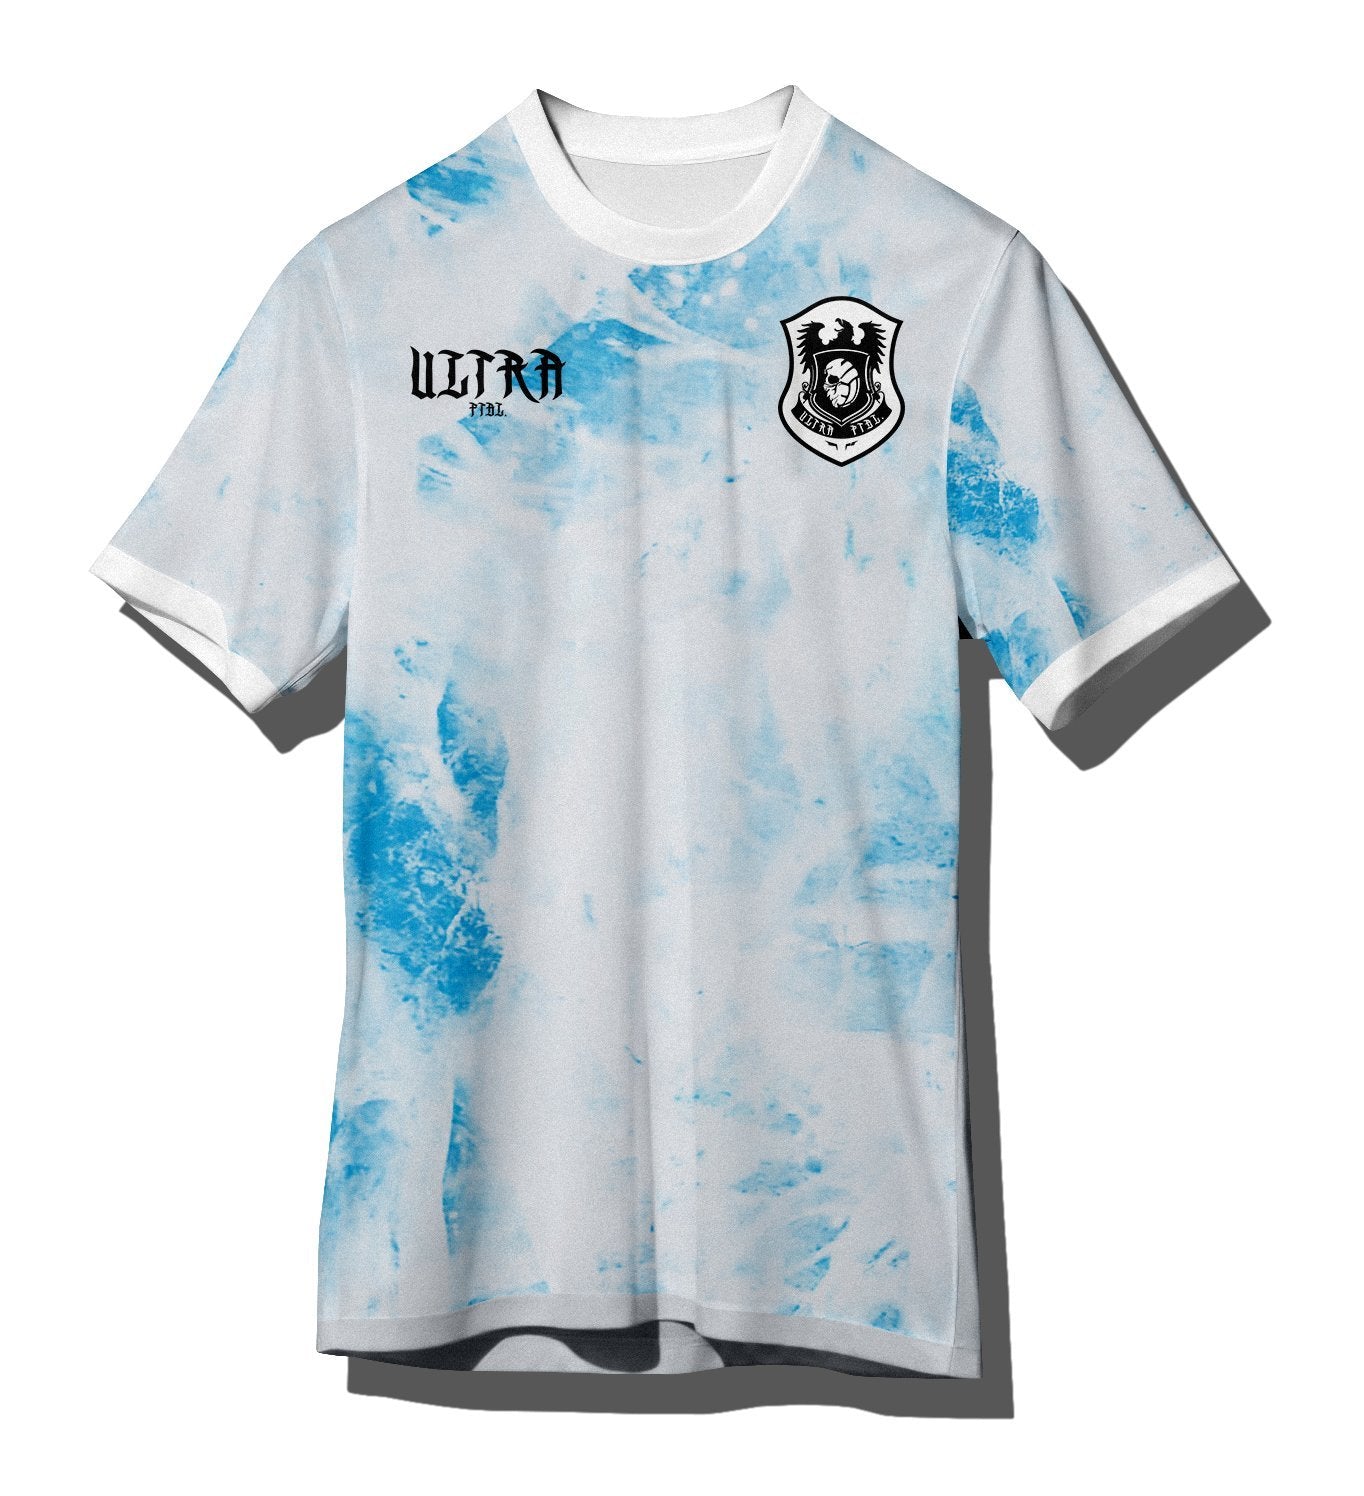 Custom Football Jersey Kit - White Walkers Limited Edition